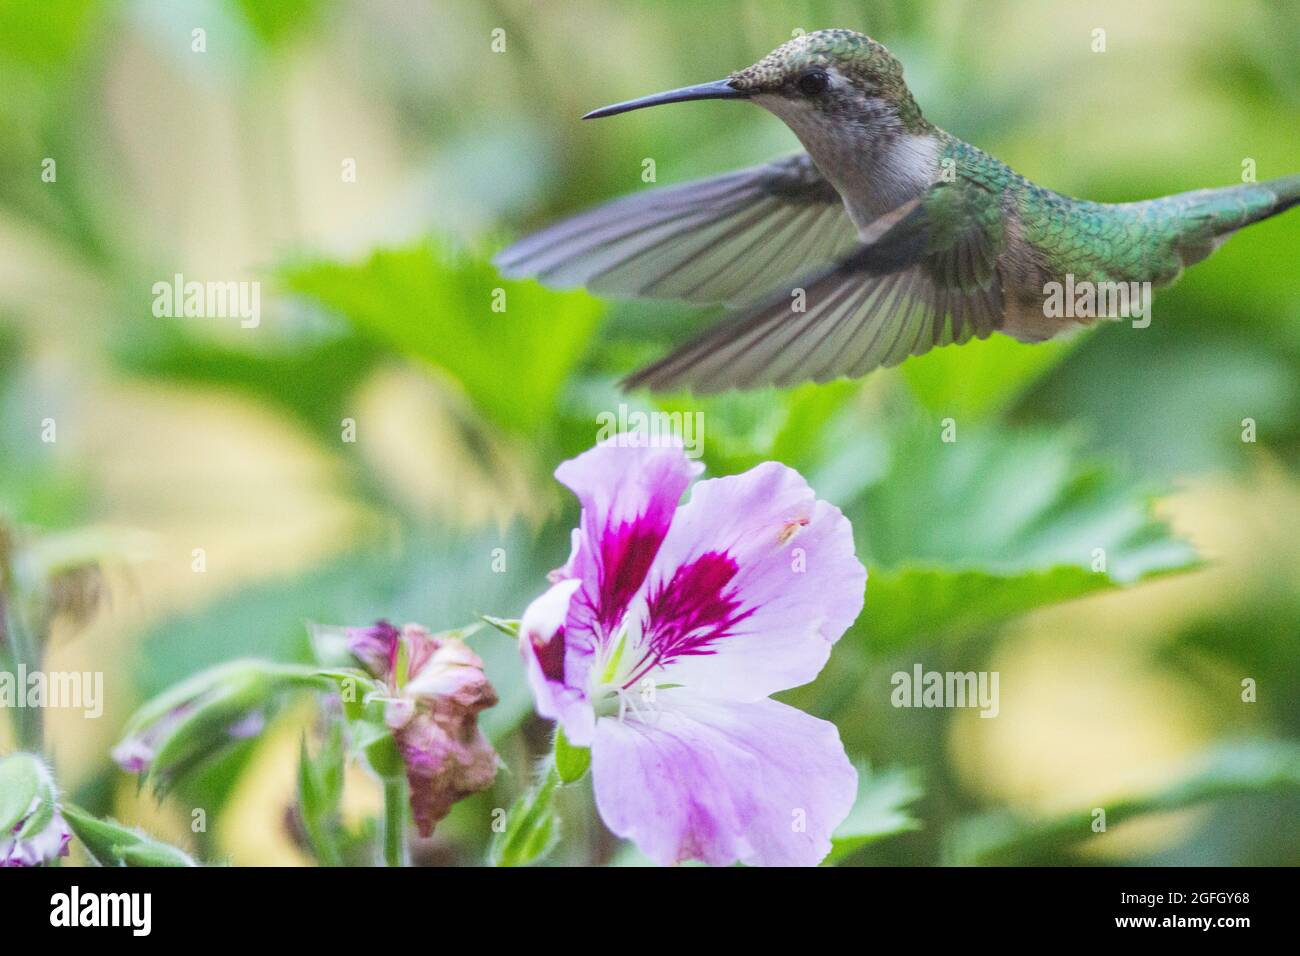 A ruby throated hummingbird flies over the flowers looking them over. A fast action freeze frame picture with wings extended. Close up photography. Stock Photo